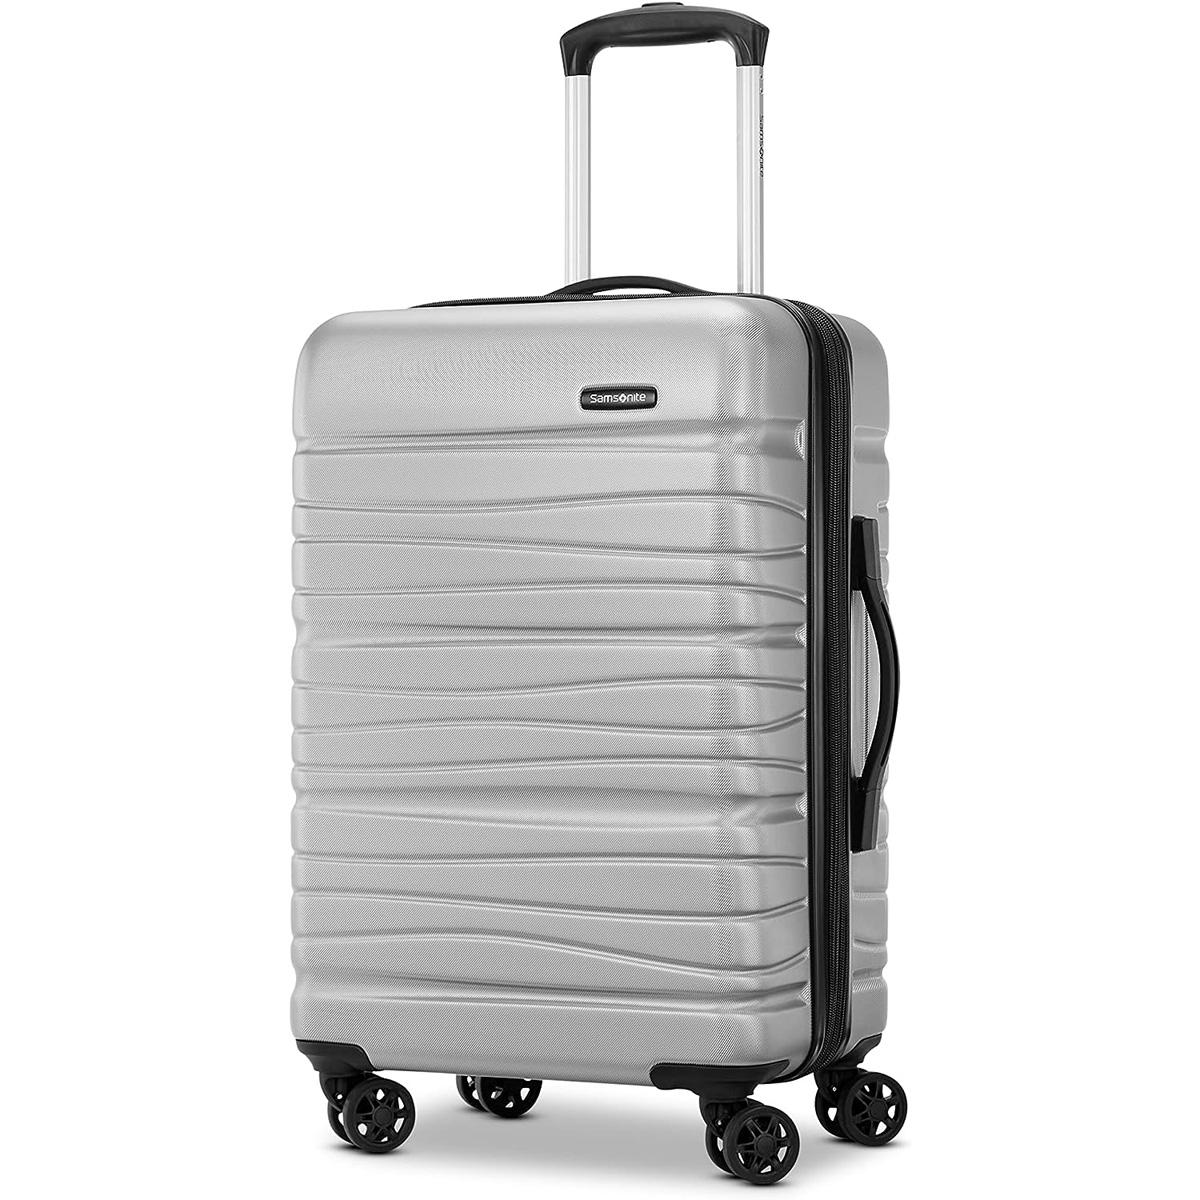 Samsonite Evolve SE Hardside 20in Carry on Expandable Luggage Spinner for $69 Shipped